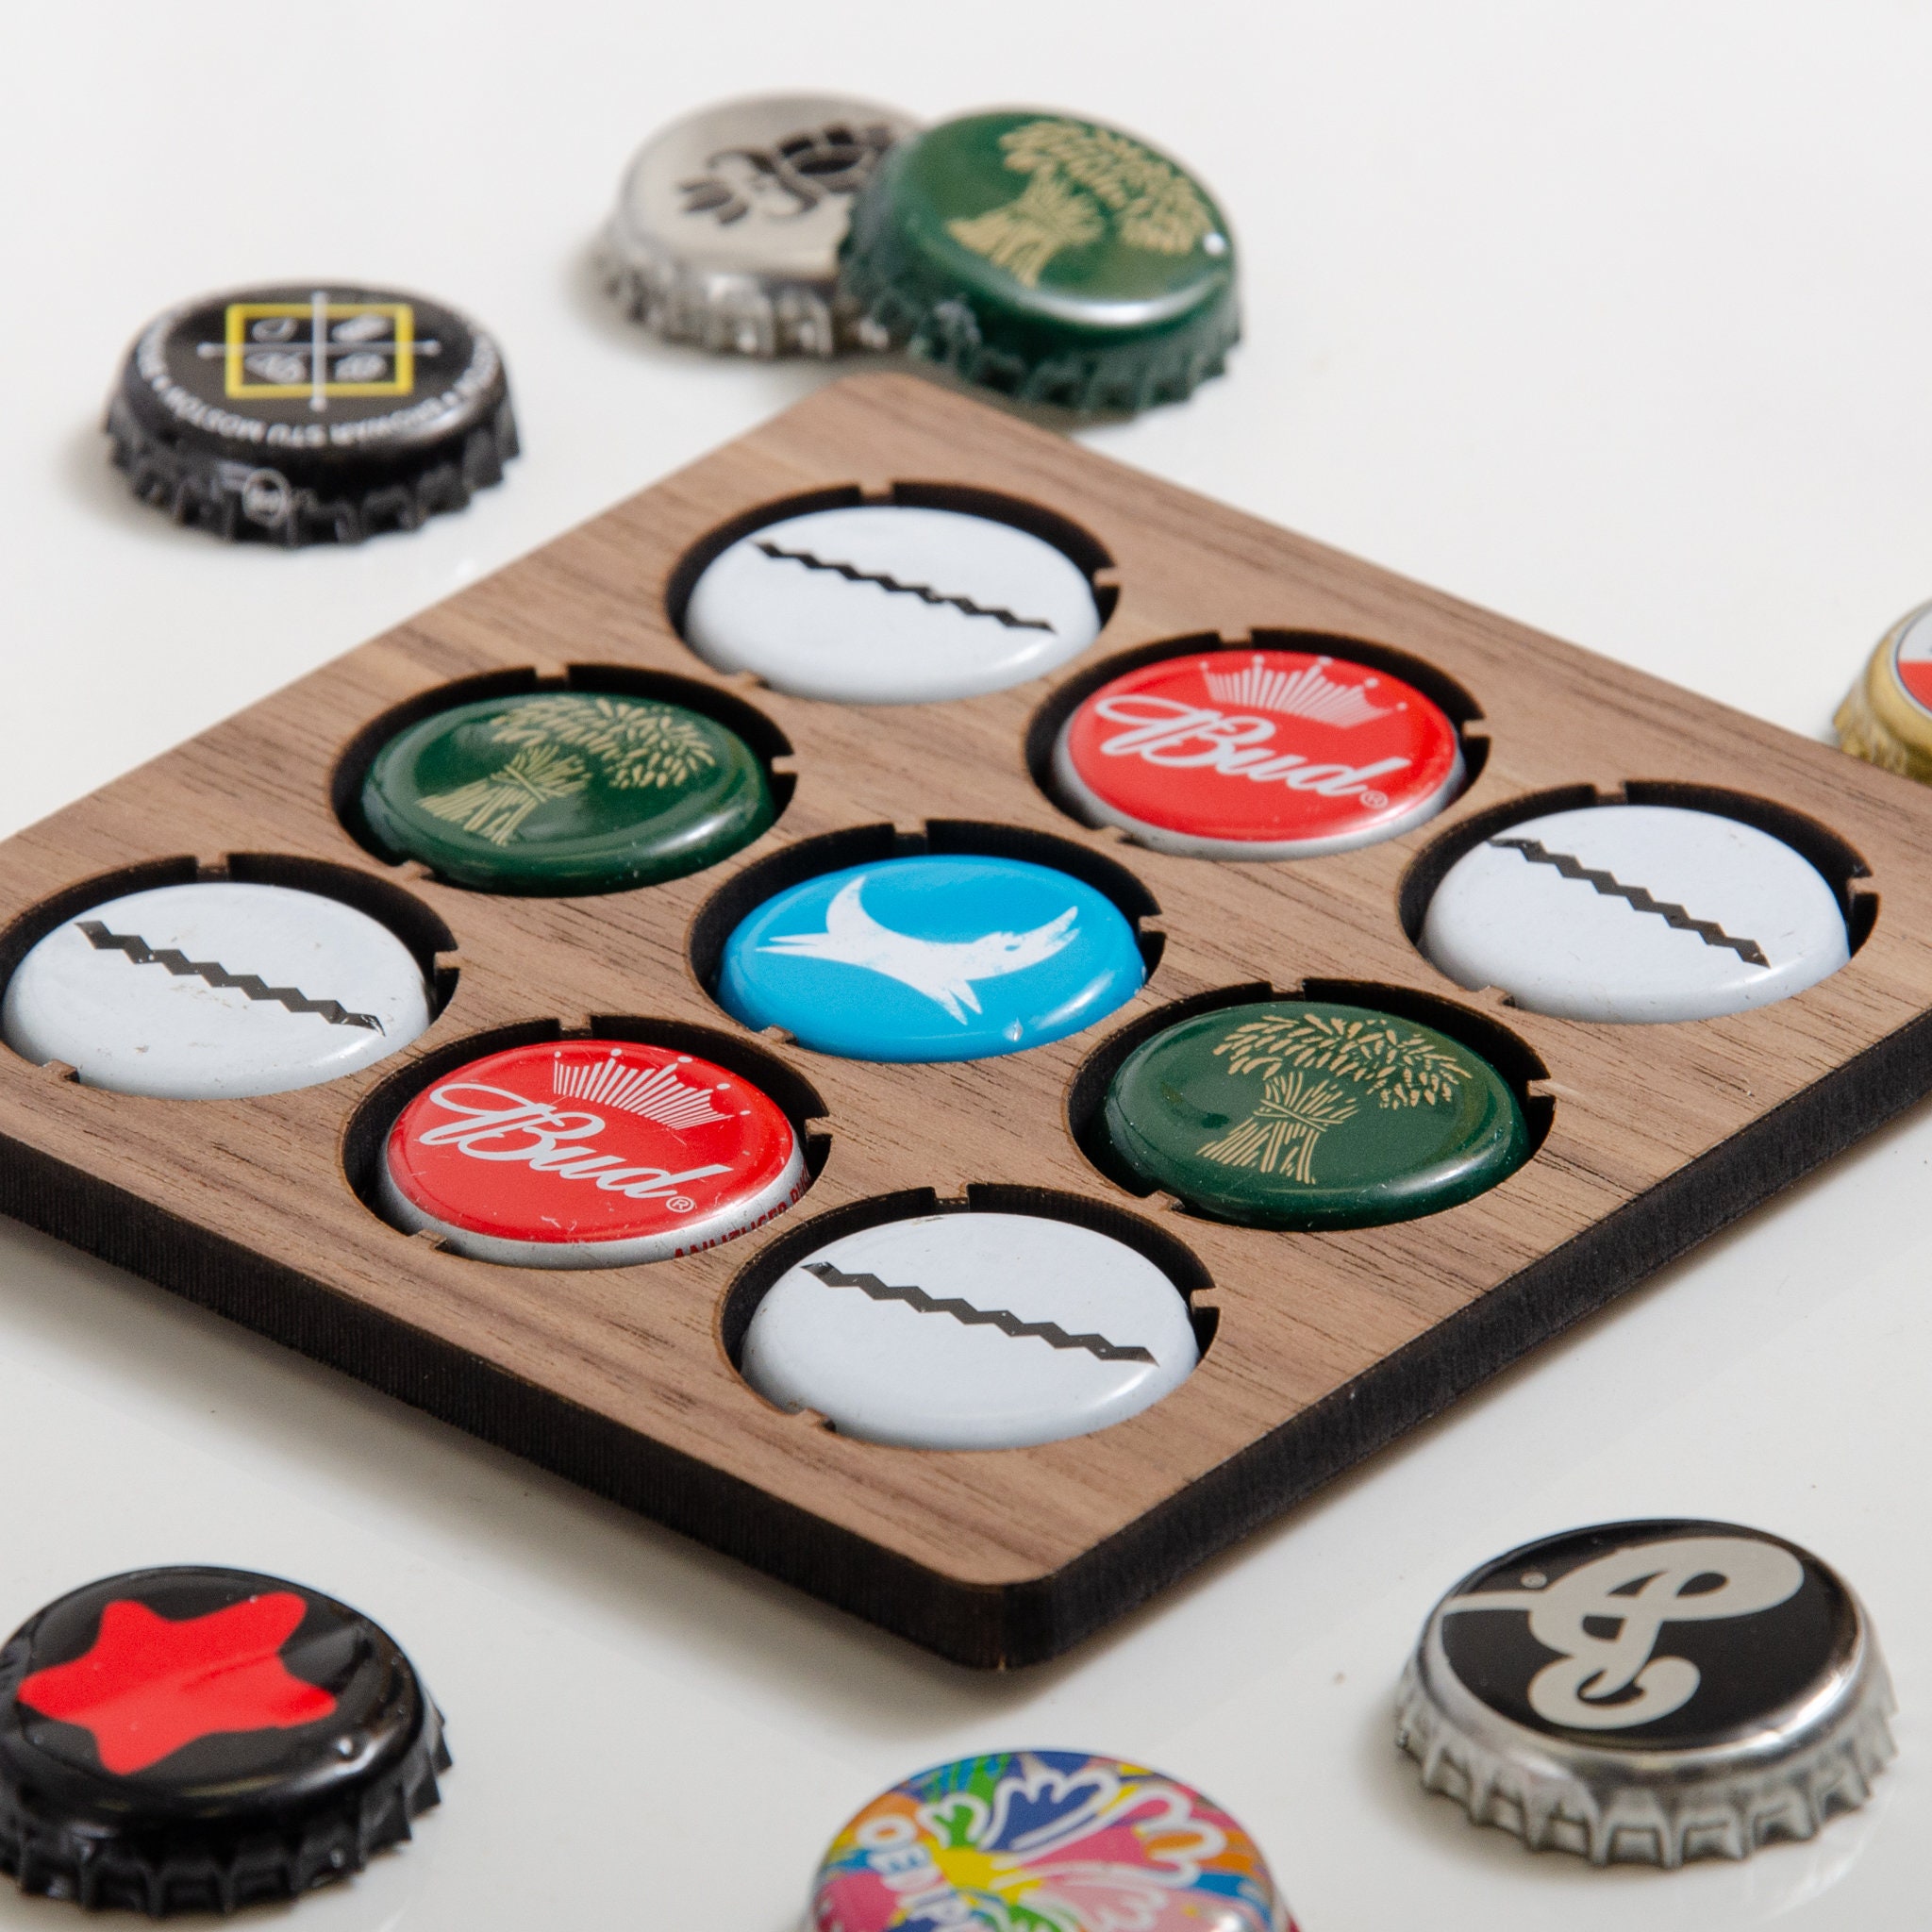 🎄Early Christmas Sale 49% 🍺Beer Bottle Cap Coaster Gift